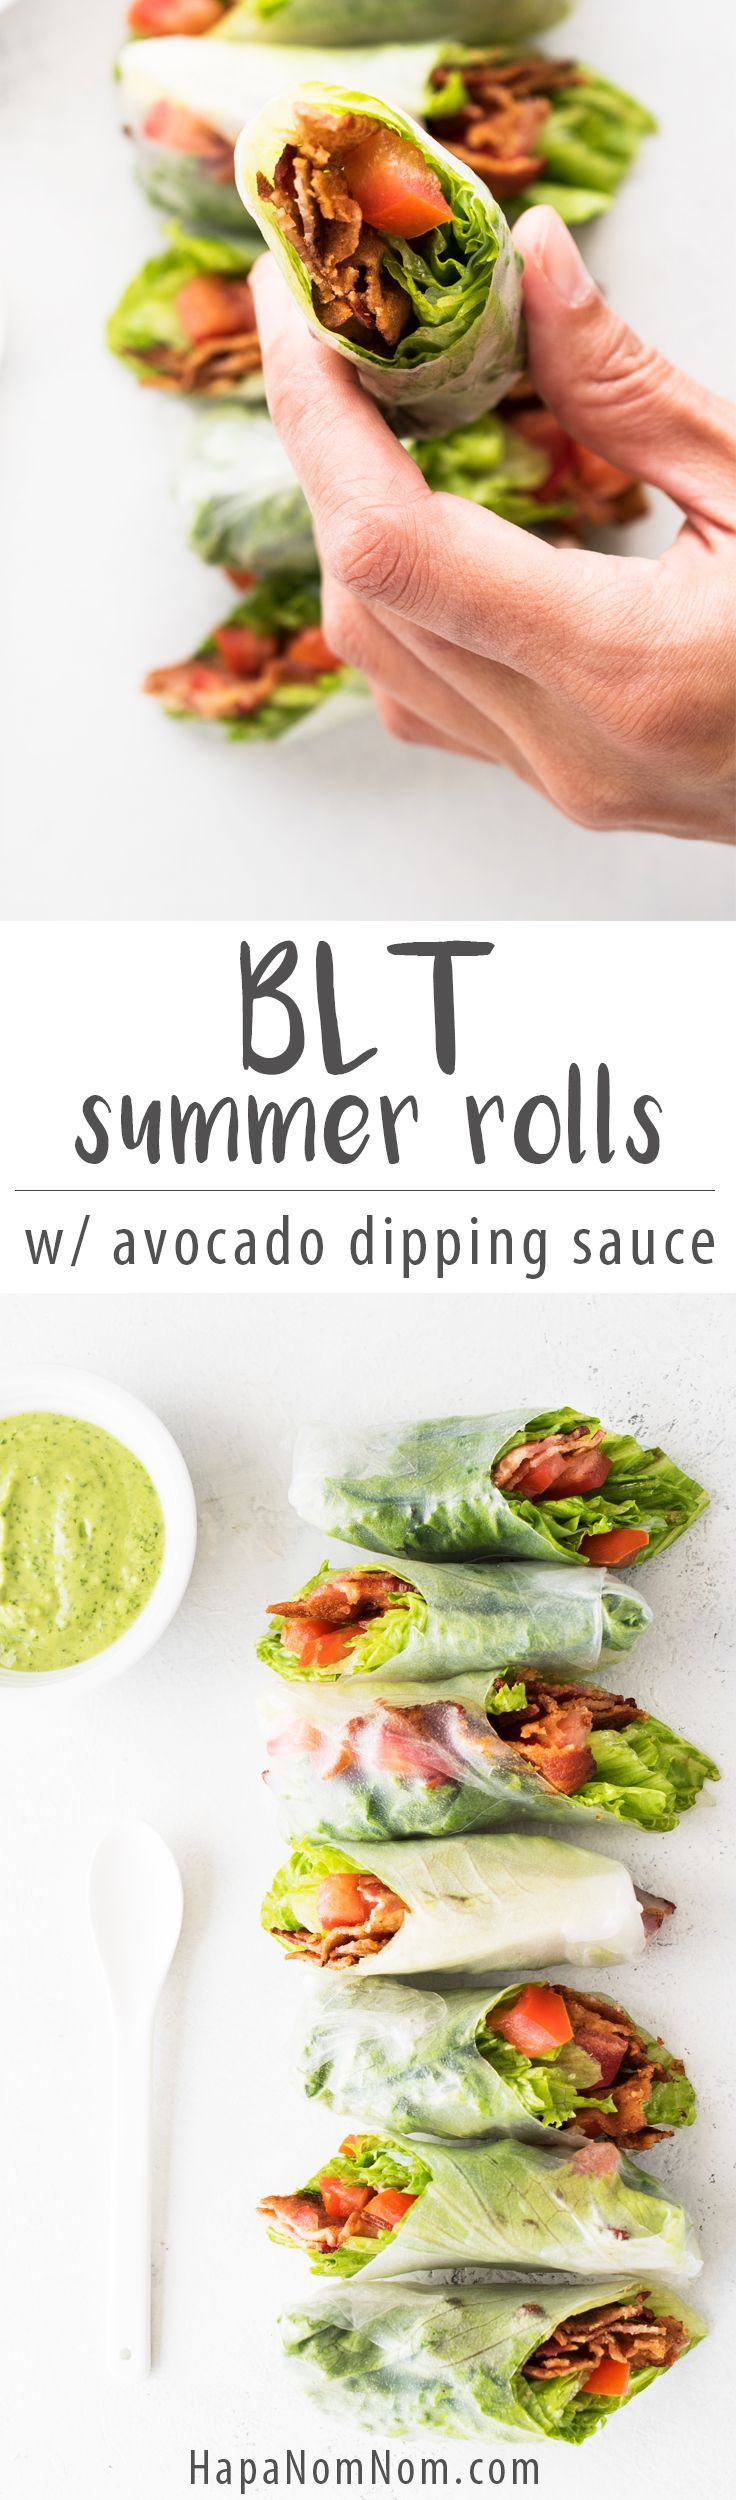 Wrapped in a thin, light rice paper wrapper these rolls give you more BLT bang for your buck!